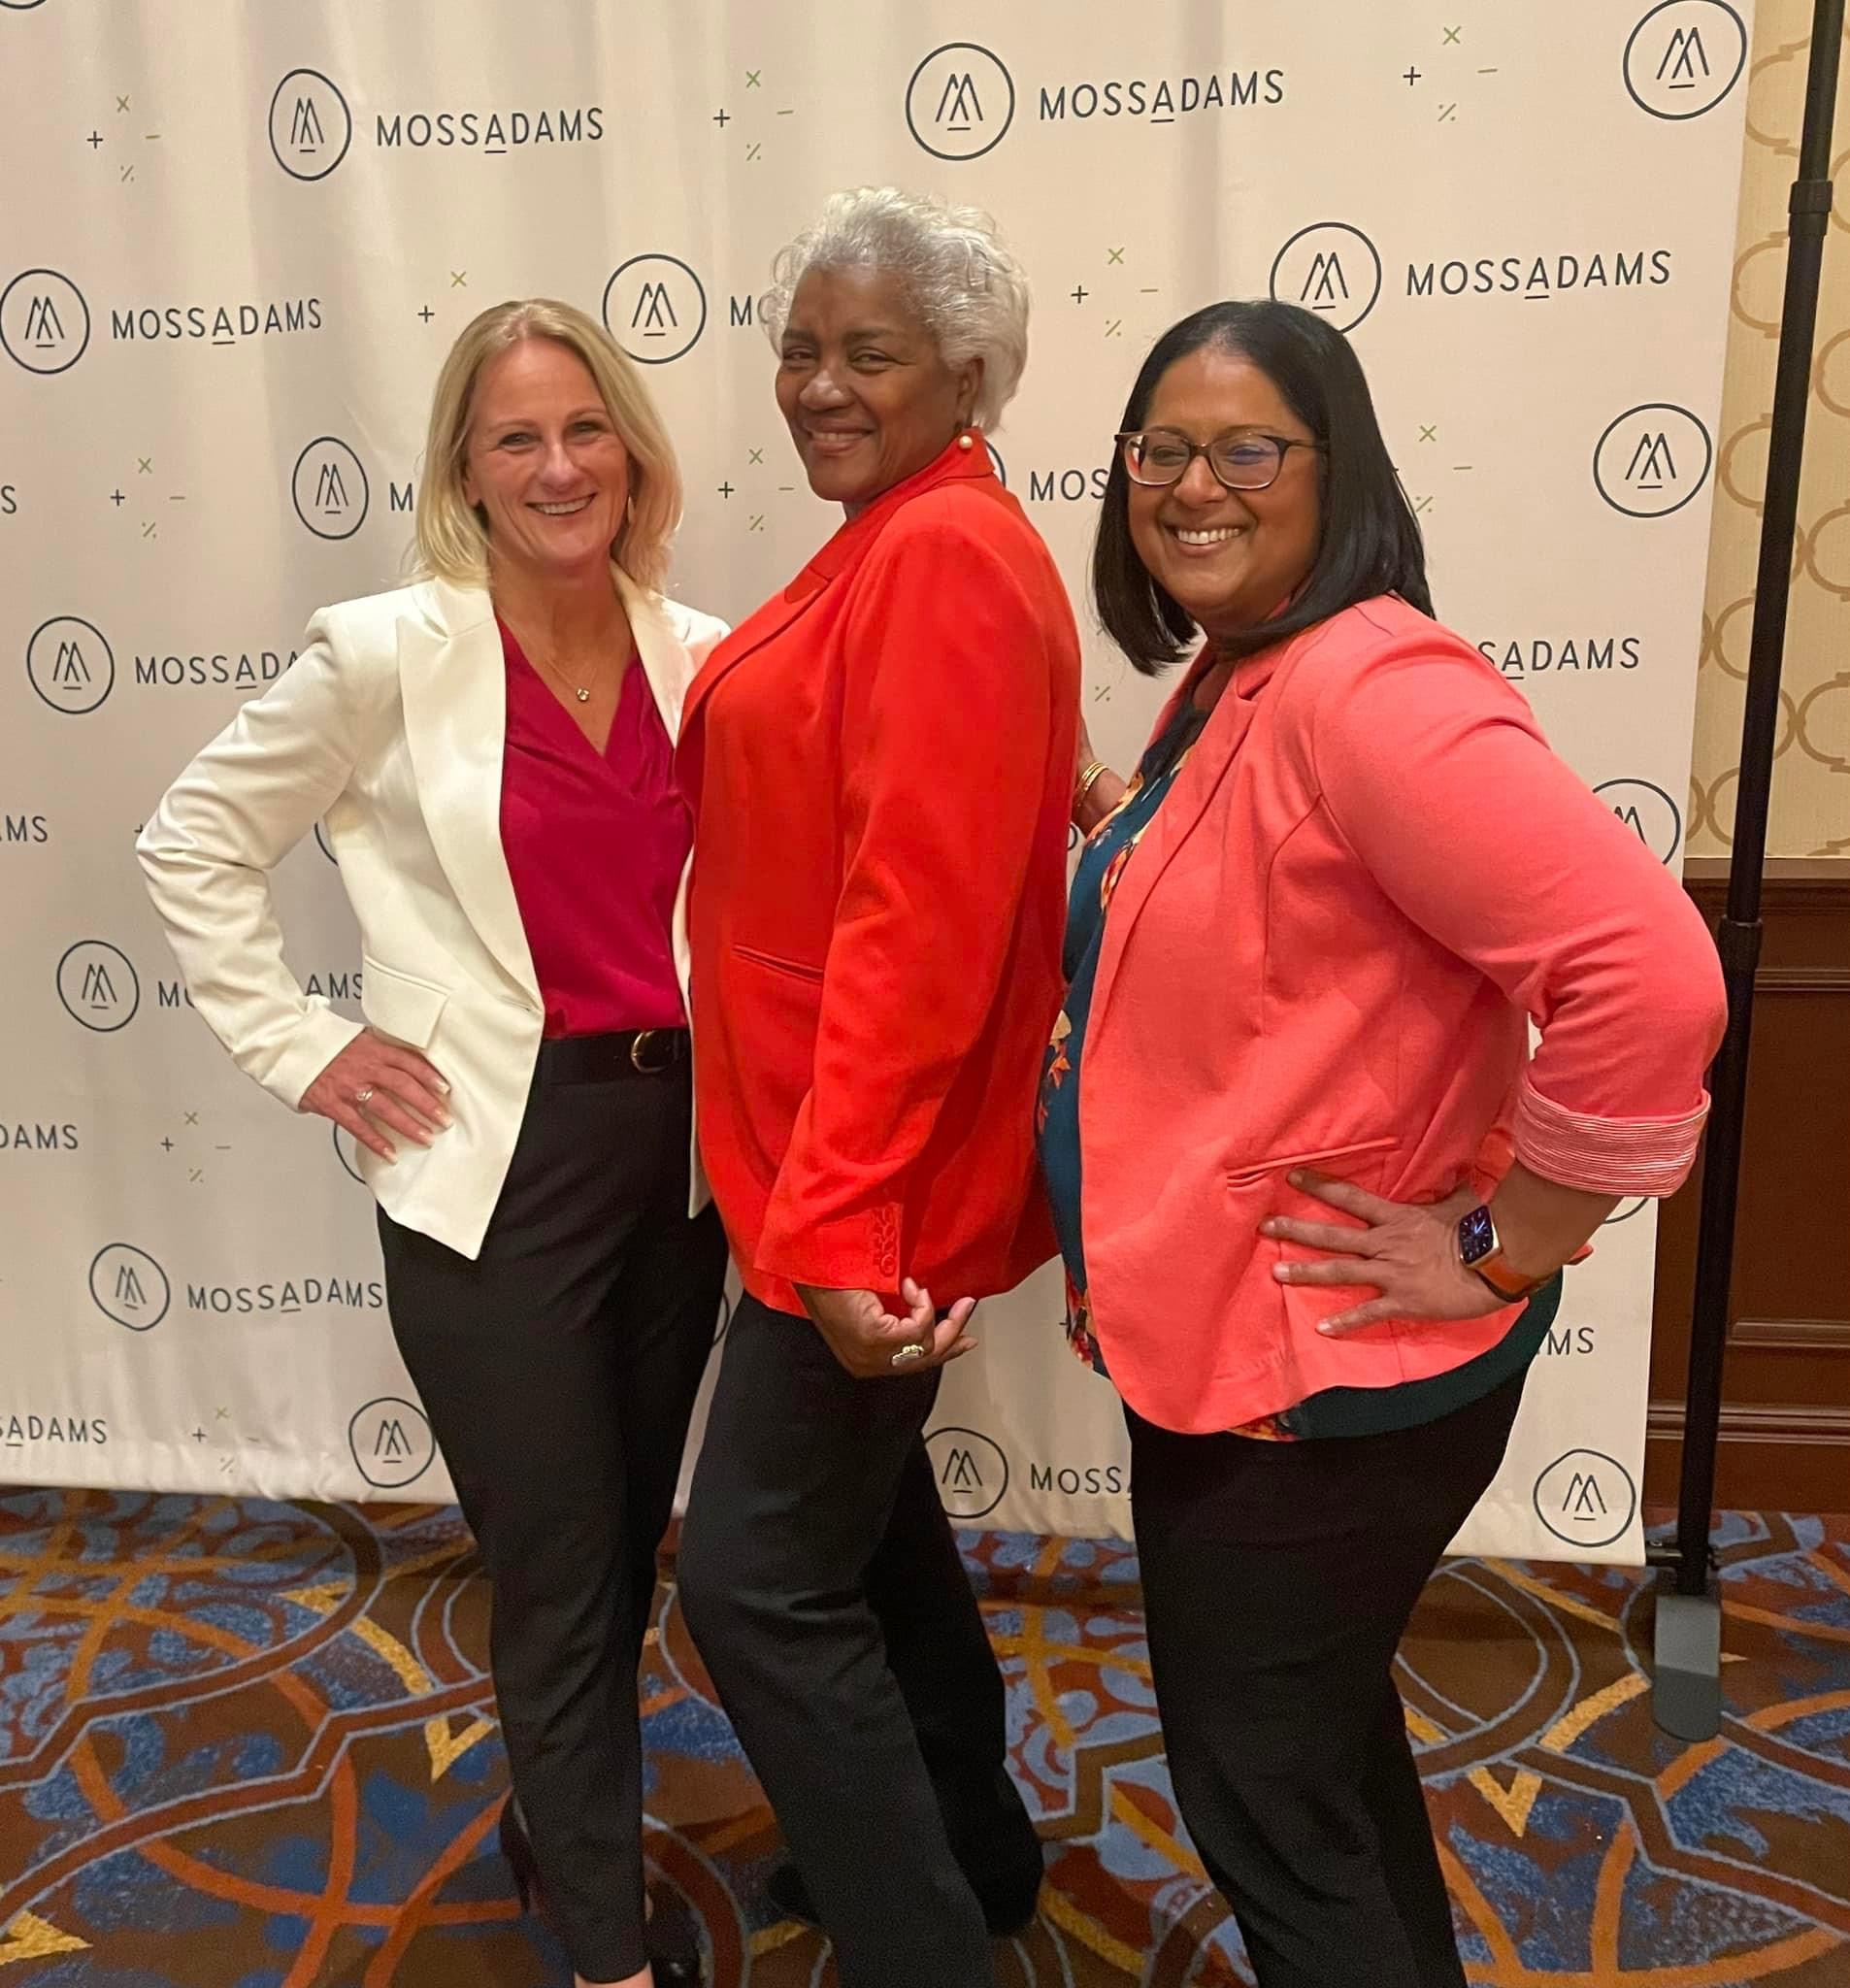 Aparna, Stacy, and Donna Brazile: Three women gather for a photo at a conference. 